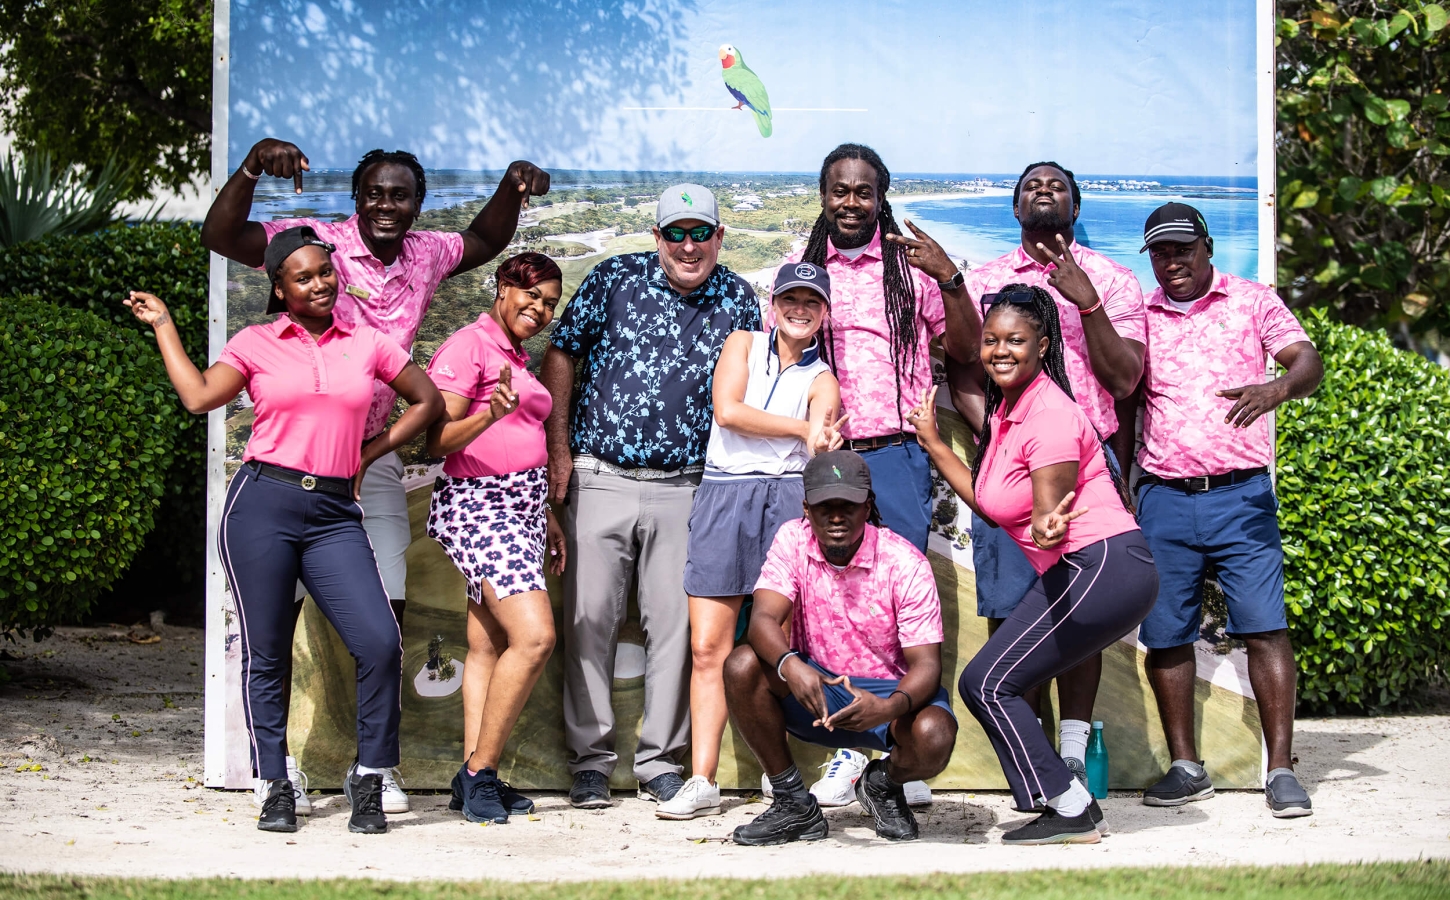 Energetic staff of The Abaco Club in pink uniforms, promoting the vibrant club lifestyle and coastal living